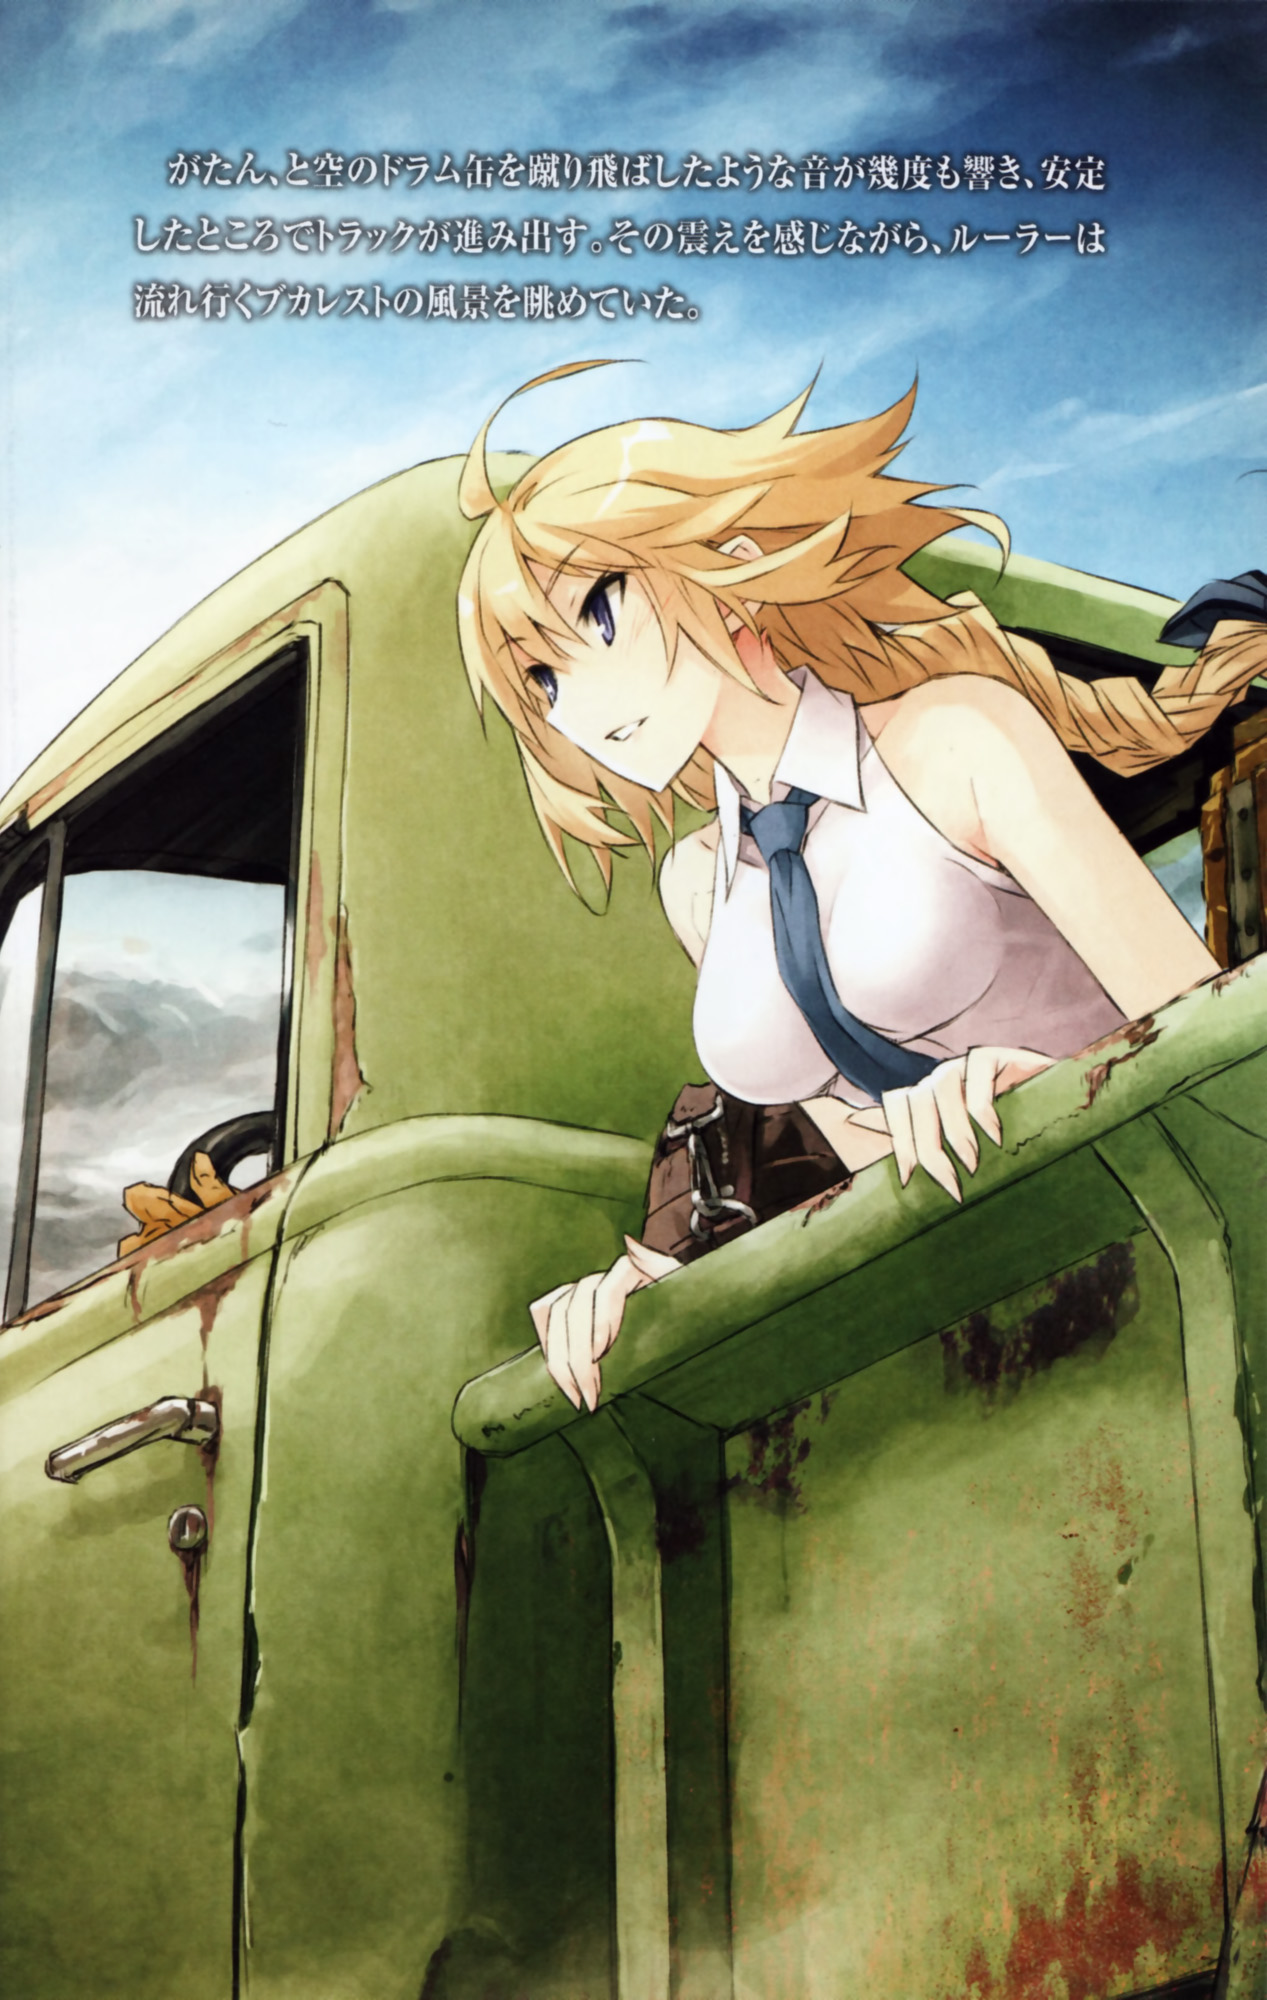 http://images4.wikia.nocookie.net/__cb20130209131636/typemoon/images/c/c7/Joan_of_Arc_%28Fate_Apocrypha%29.jpg